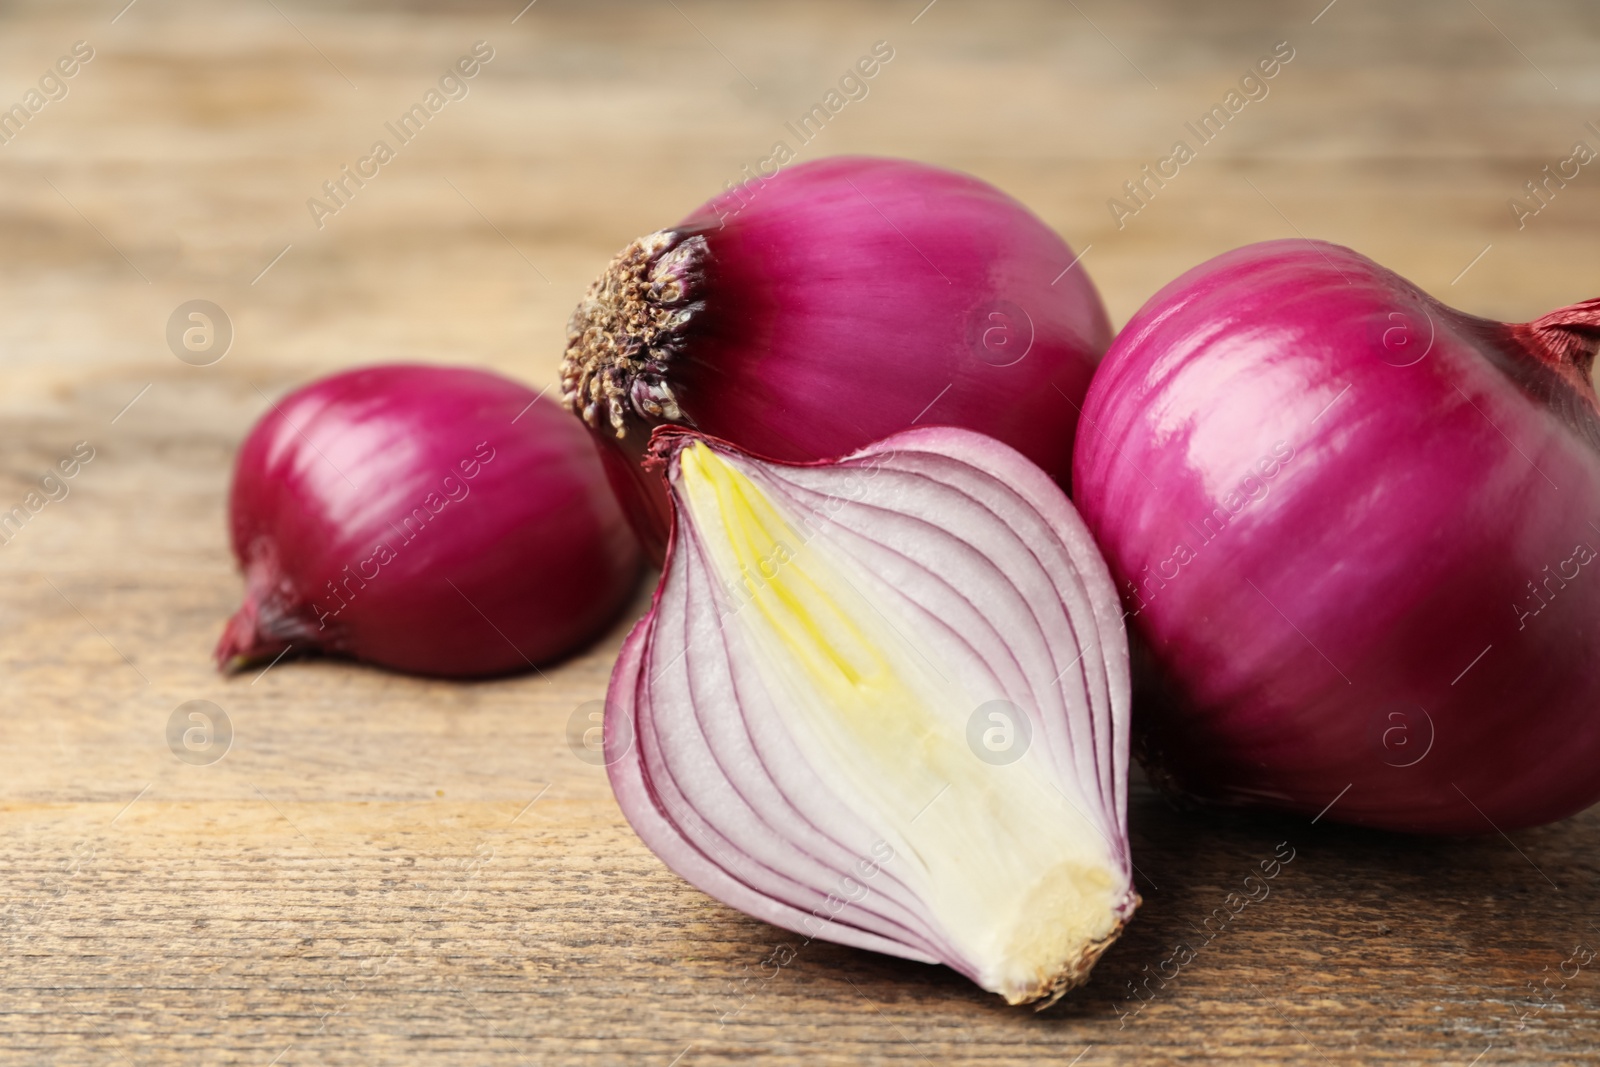 Photo of Ripe red onion bulbs on wooden table, closeup